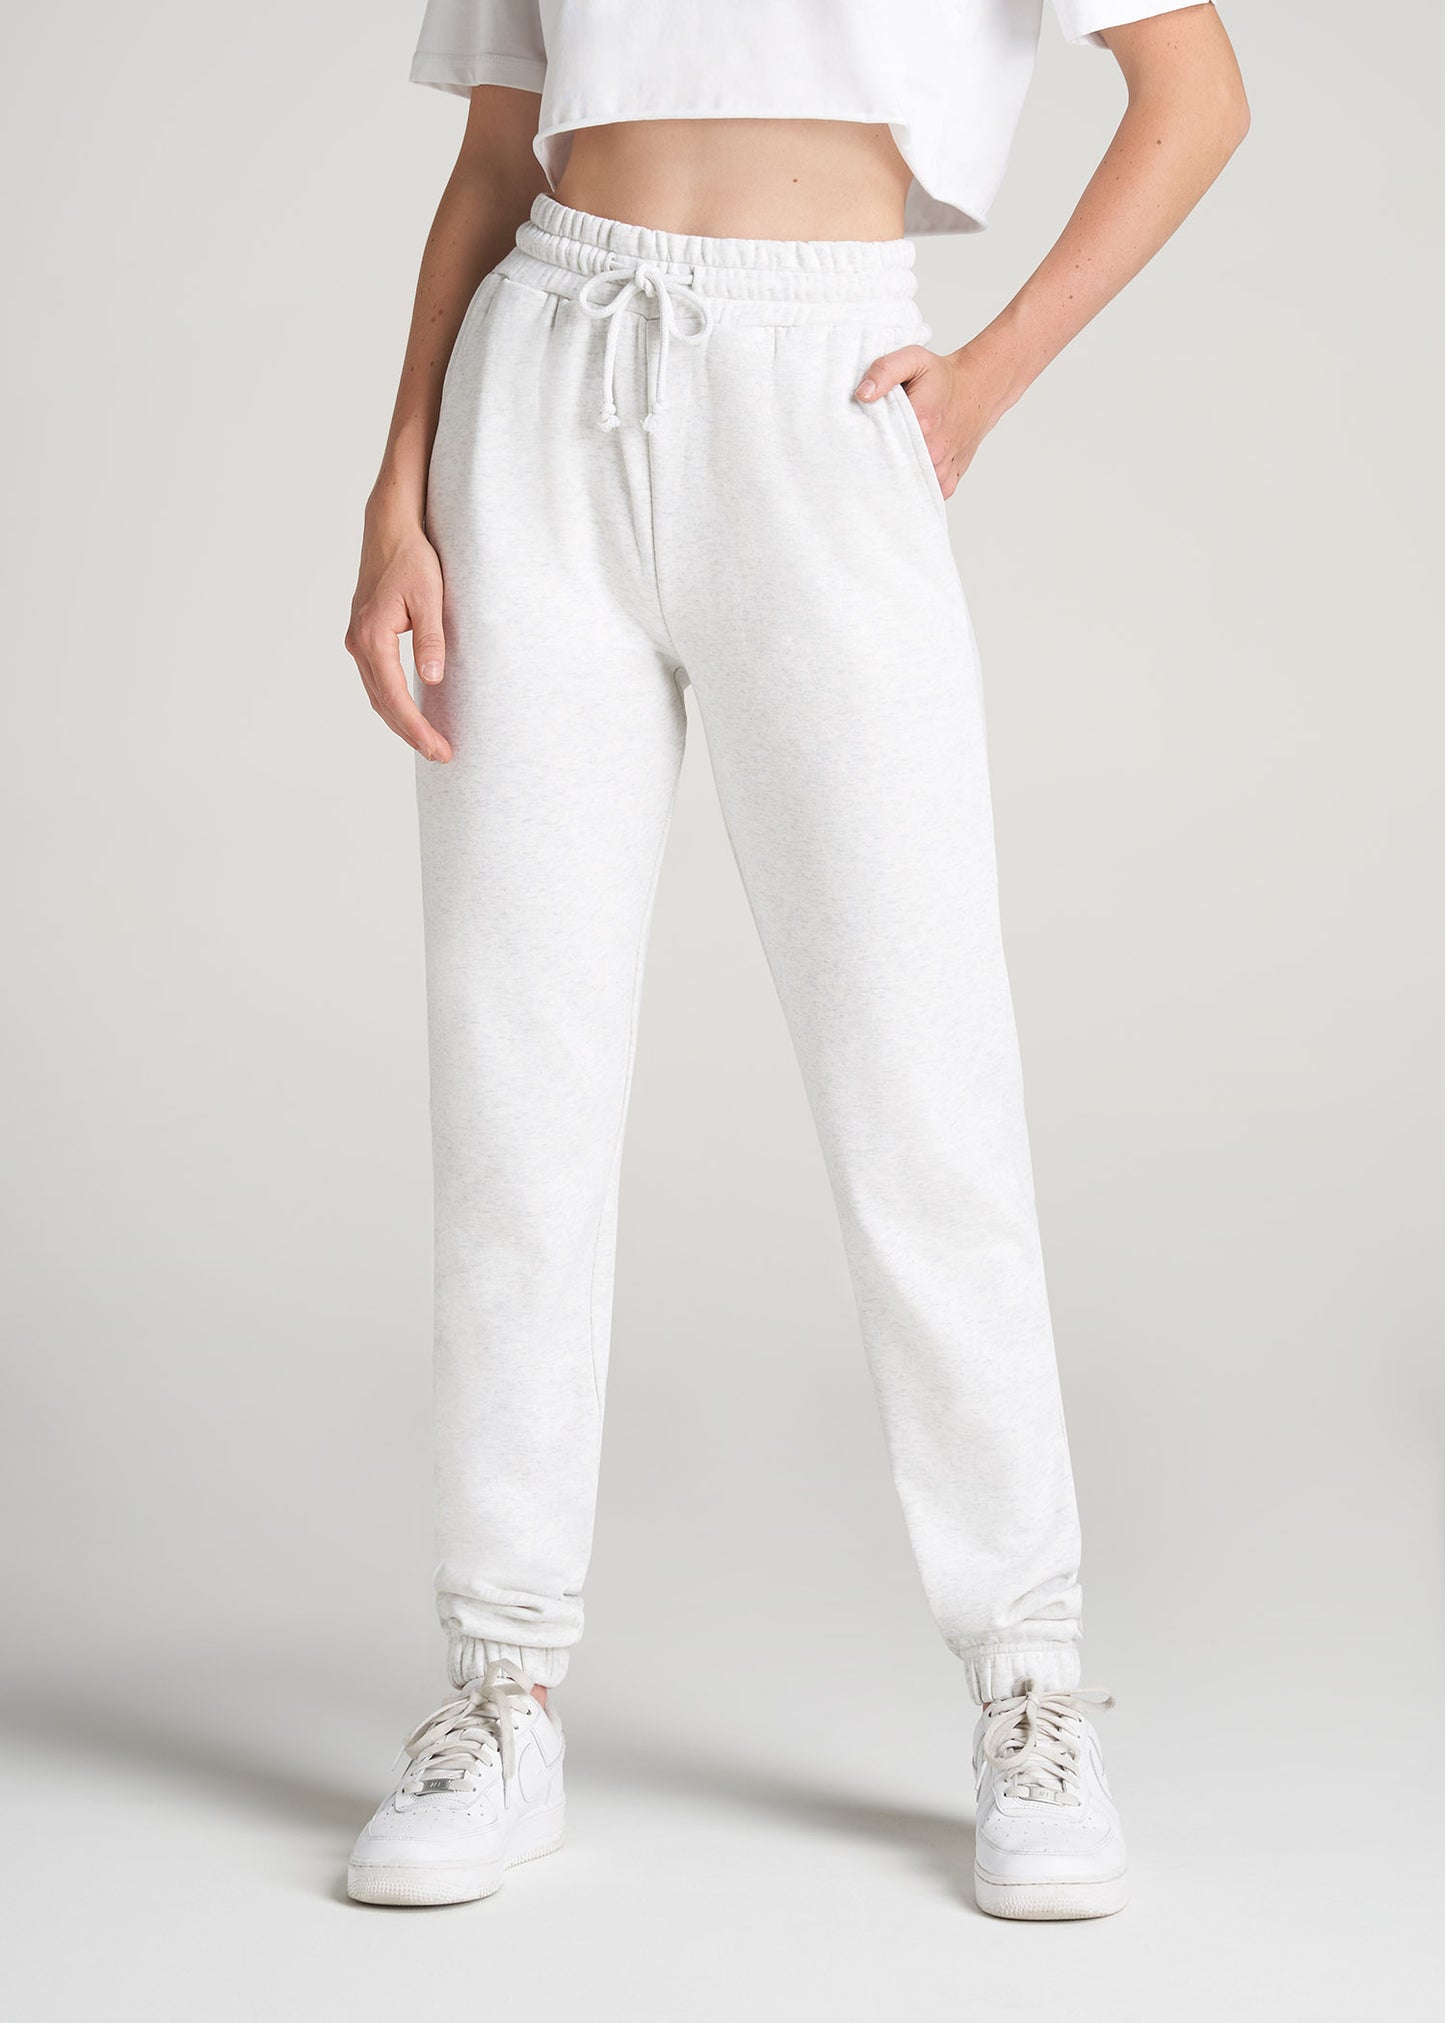 The Best White Sweatpants Womens